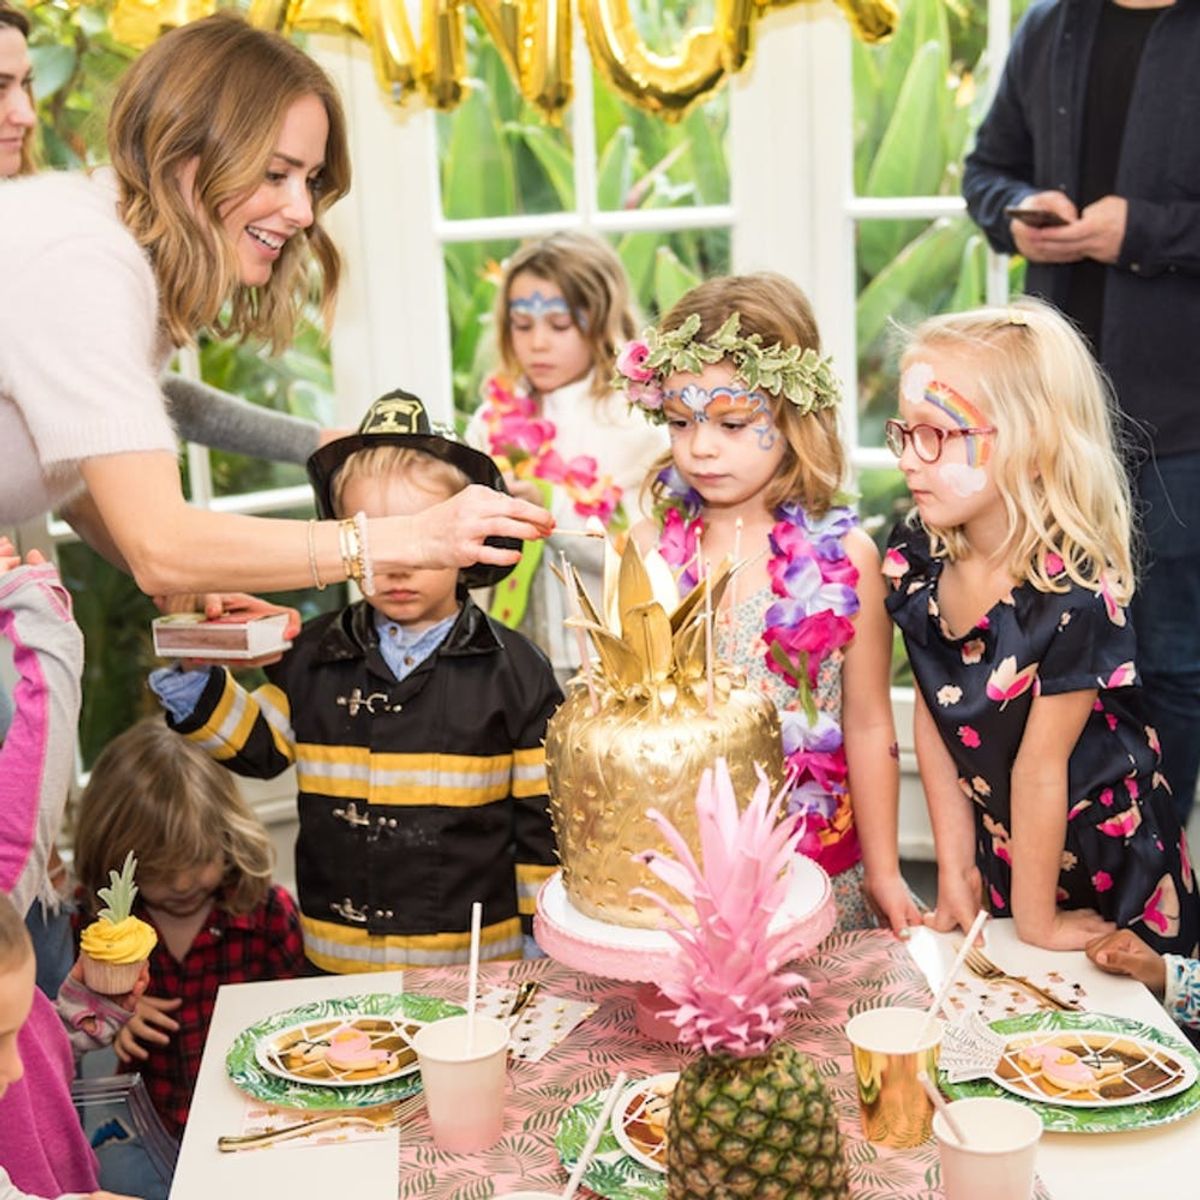 How to Throw a Kids’ Birthday Party the Adults Will Obsess Over